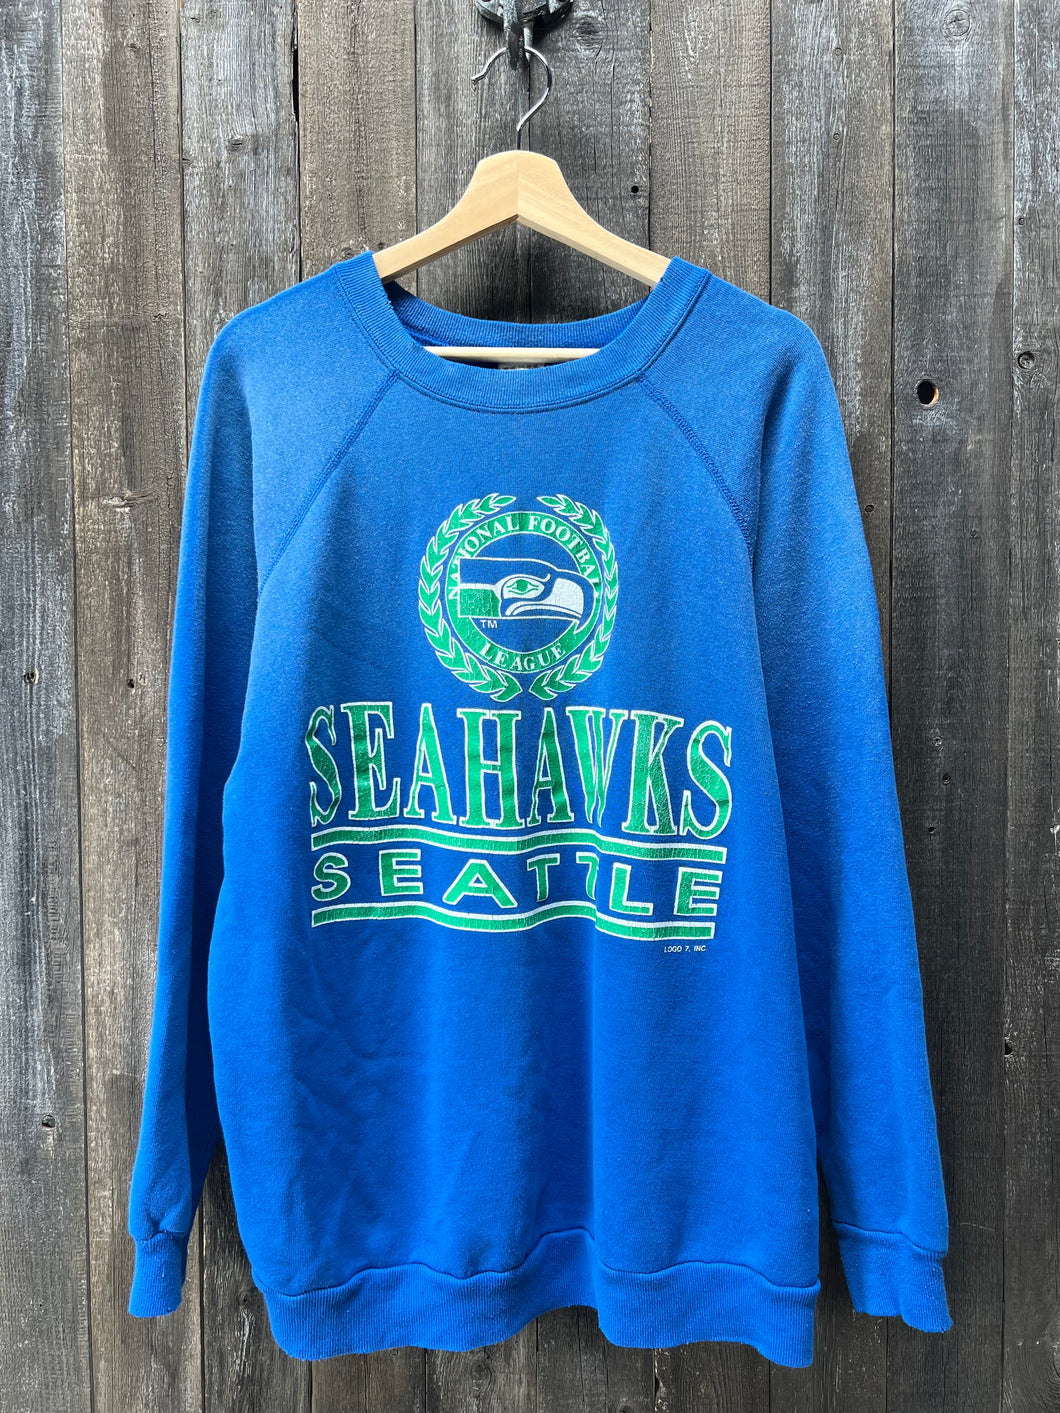 Seahawks Sweatshirt -L/XL-Customize Your Embroidery Wording